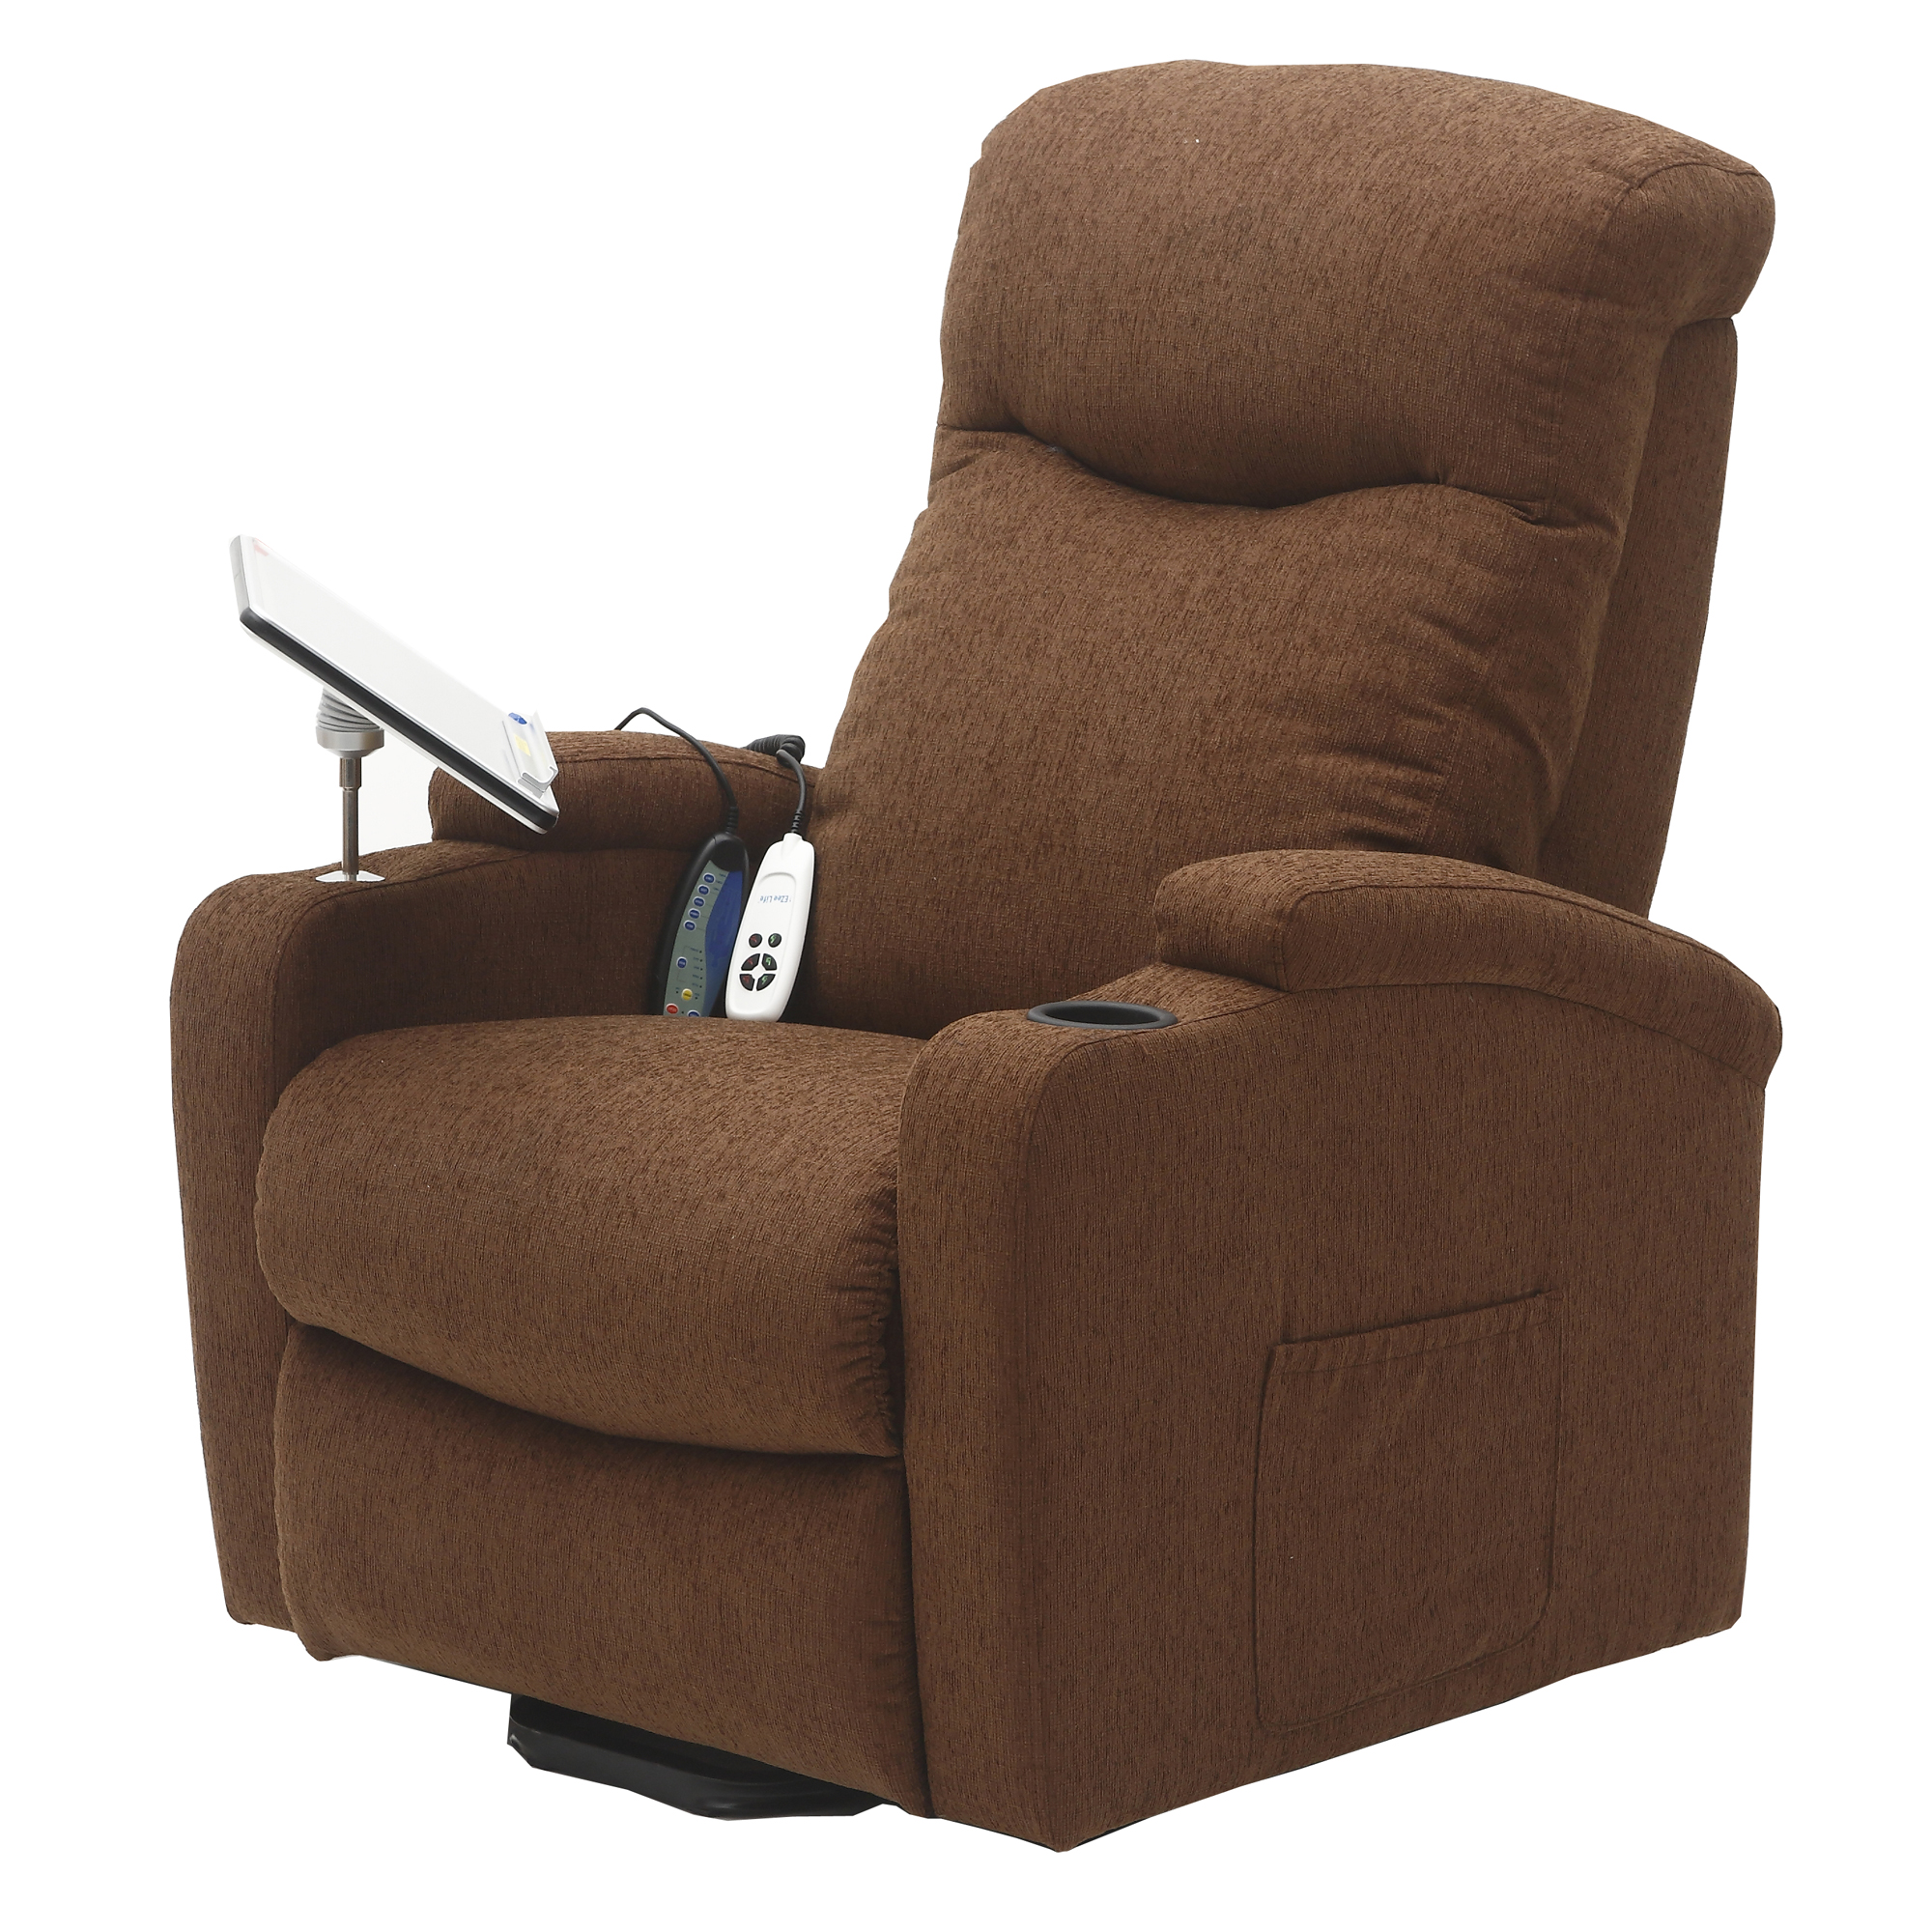 CH4006 Saturn Lift Chair Image